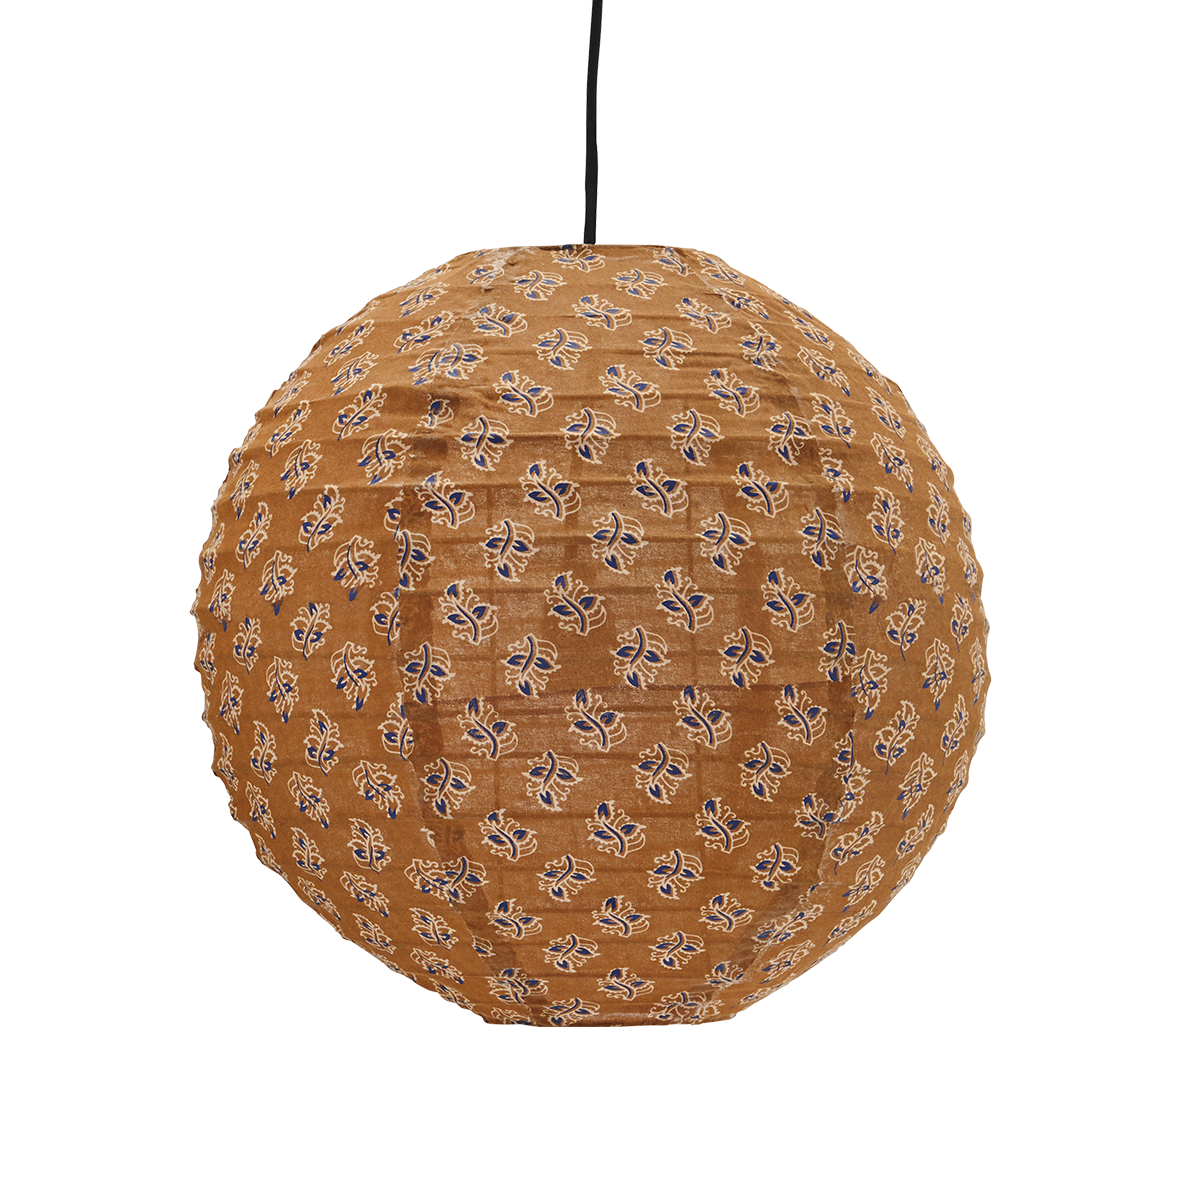 Printed cotton ceiling lamp